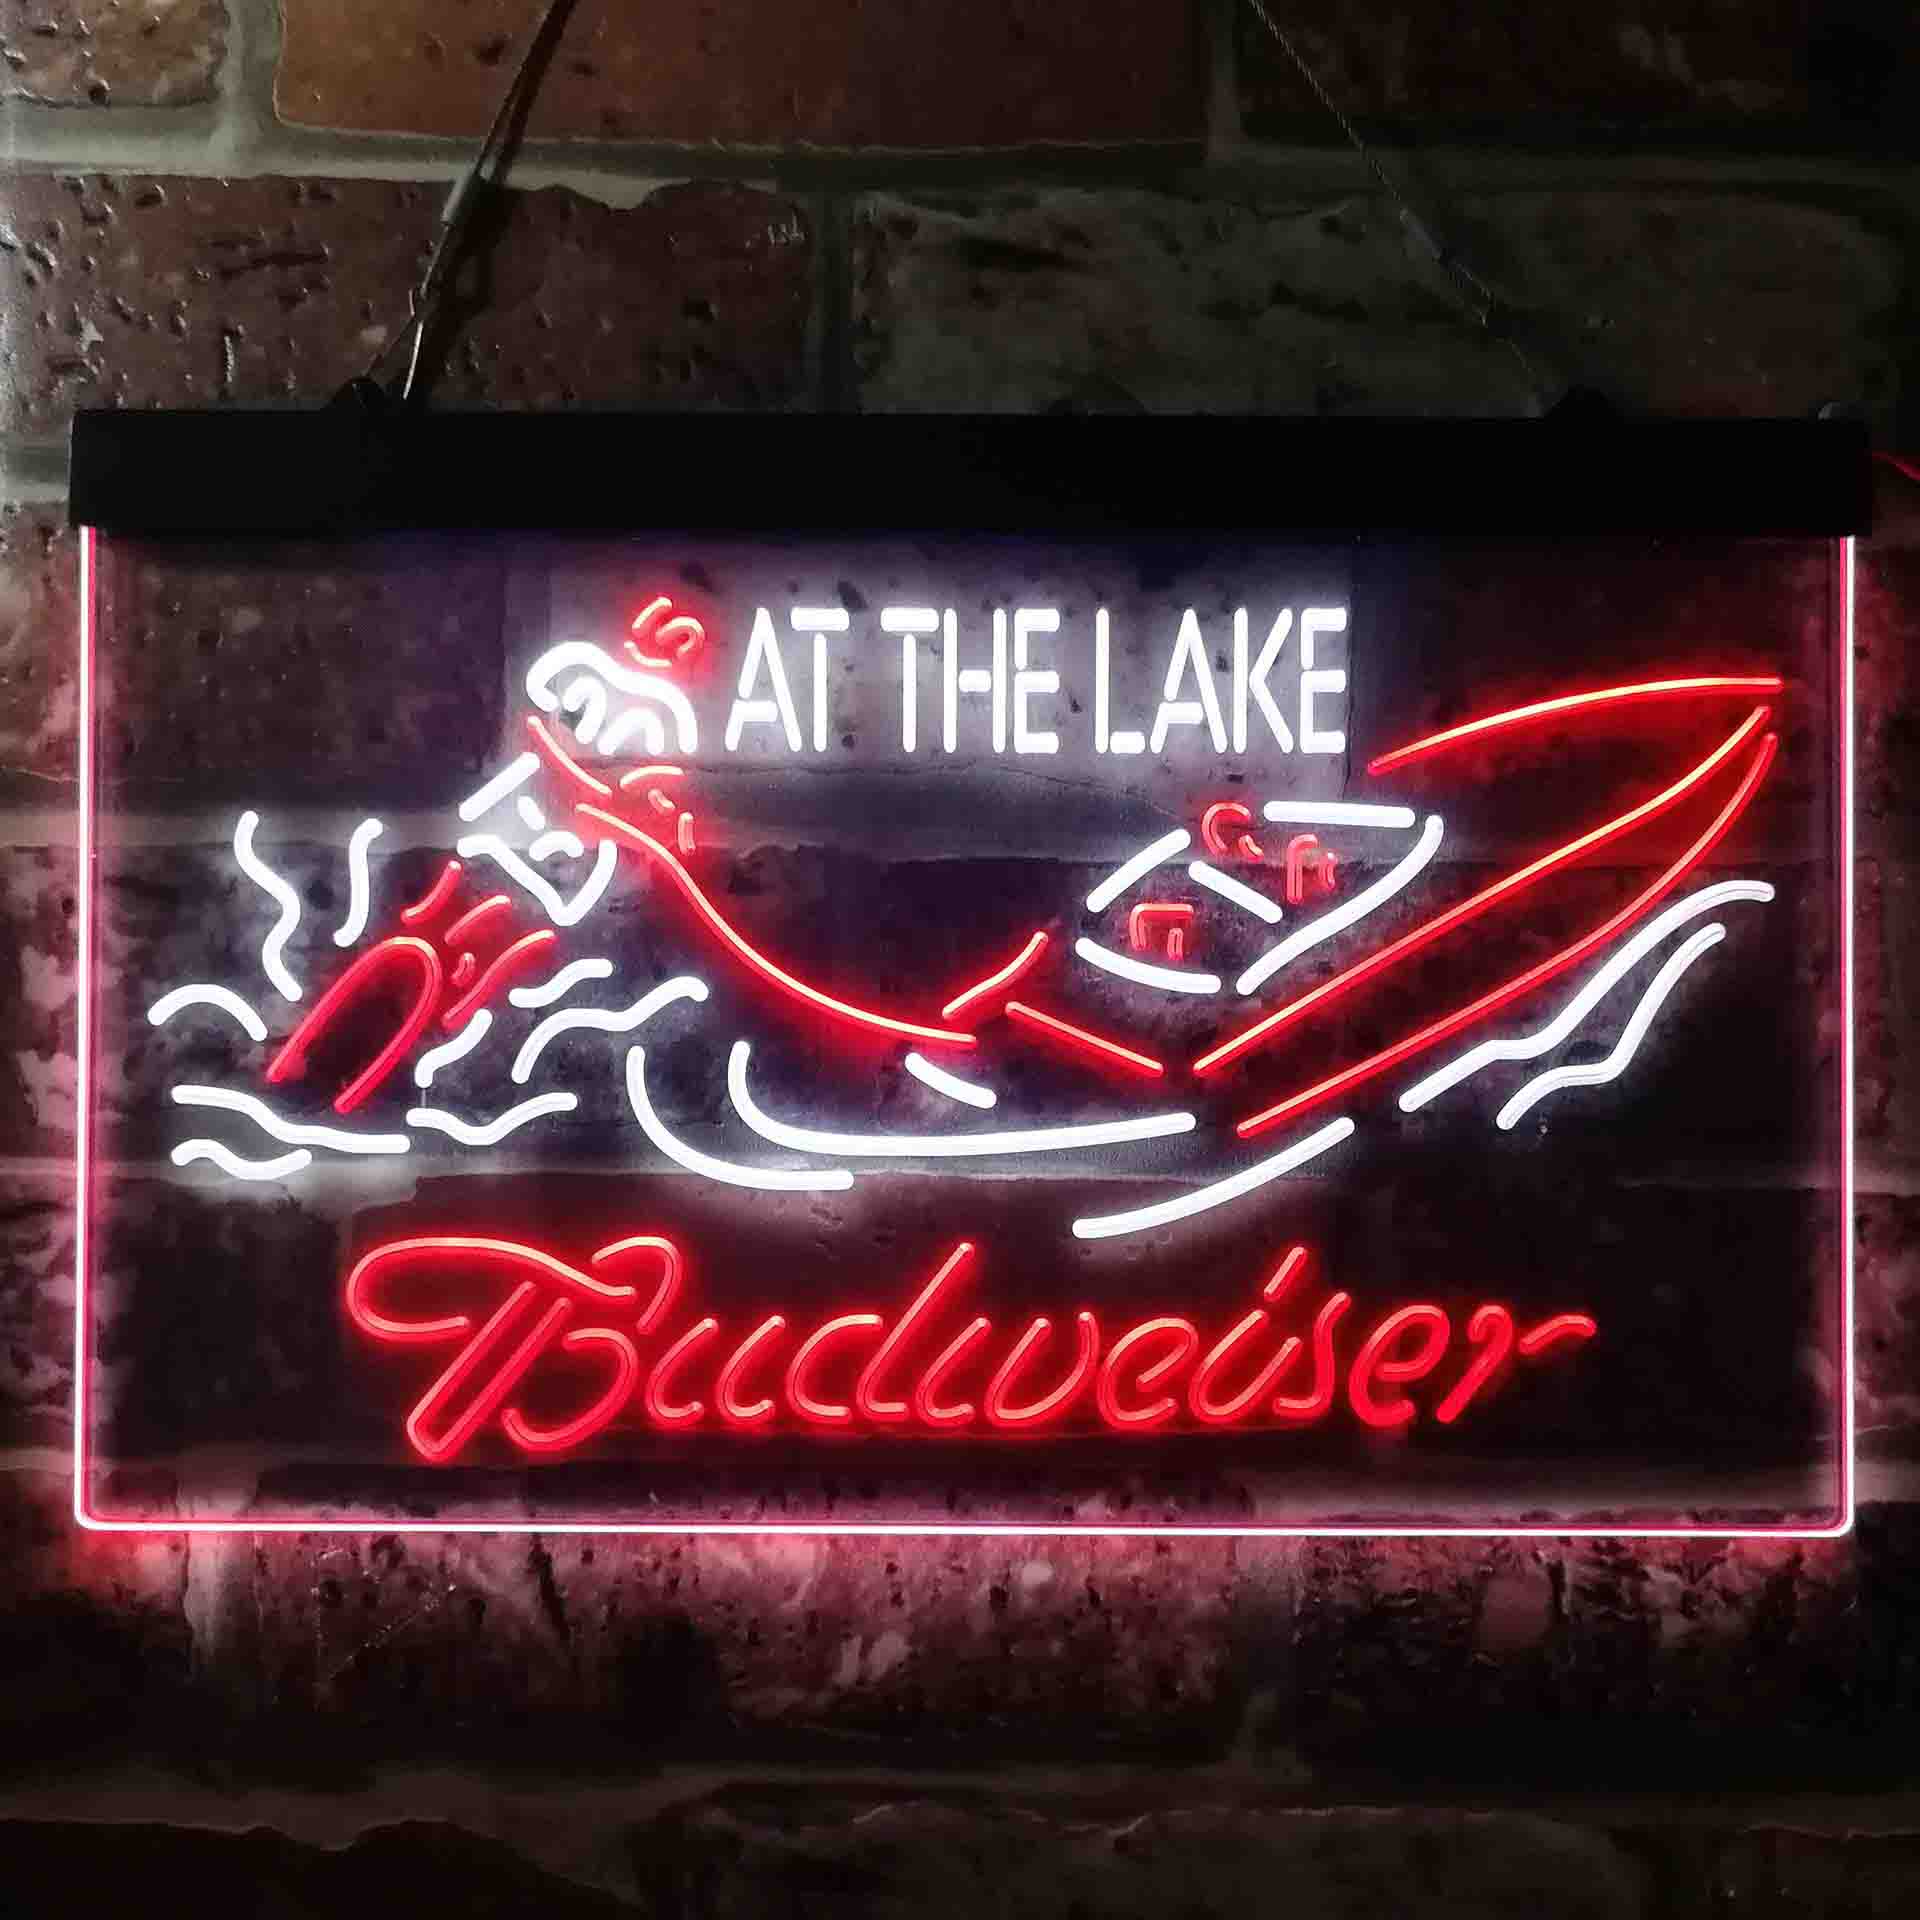 Budweiser At the Lake Neon LED Sign